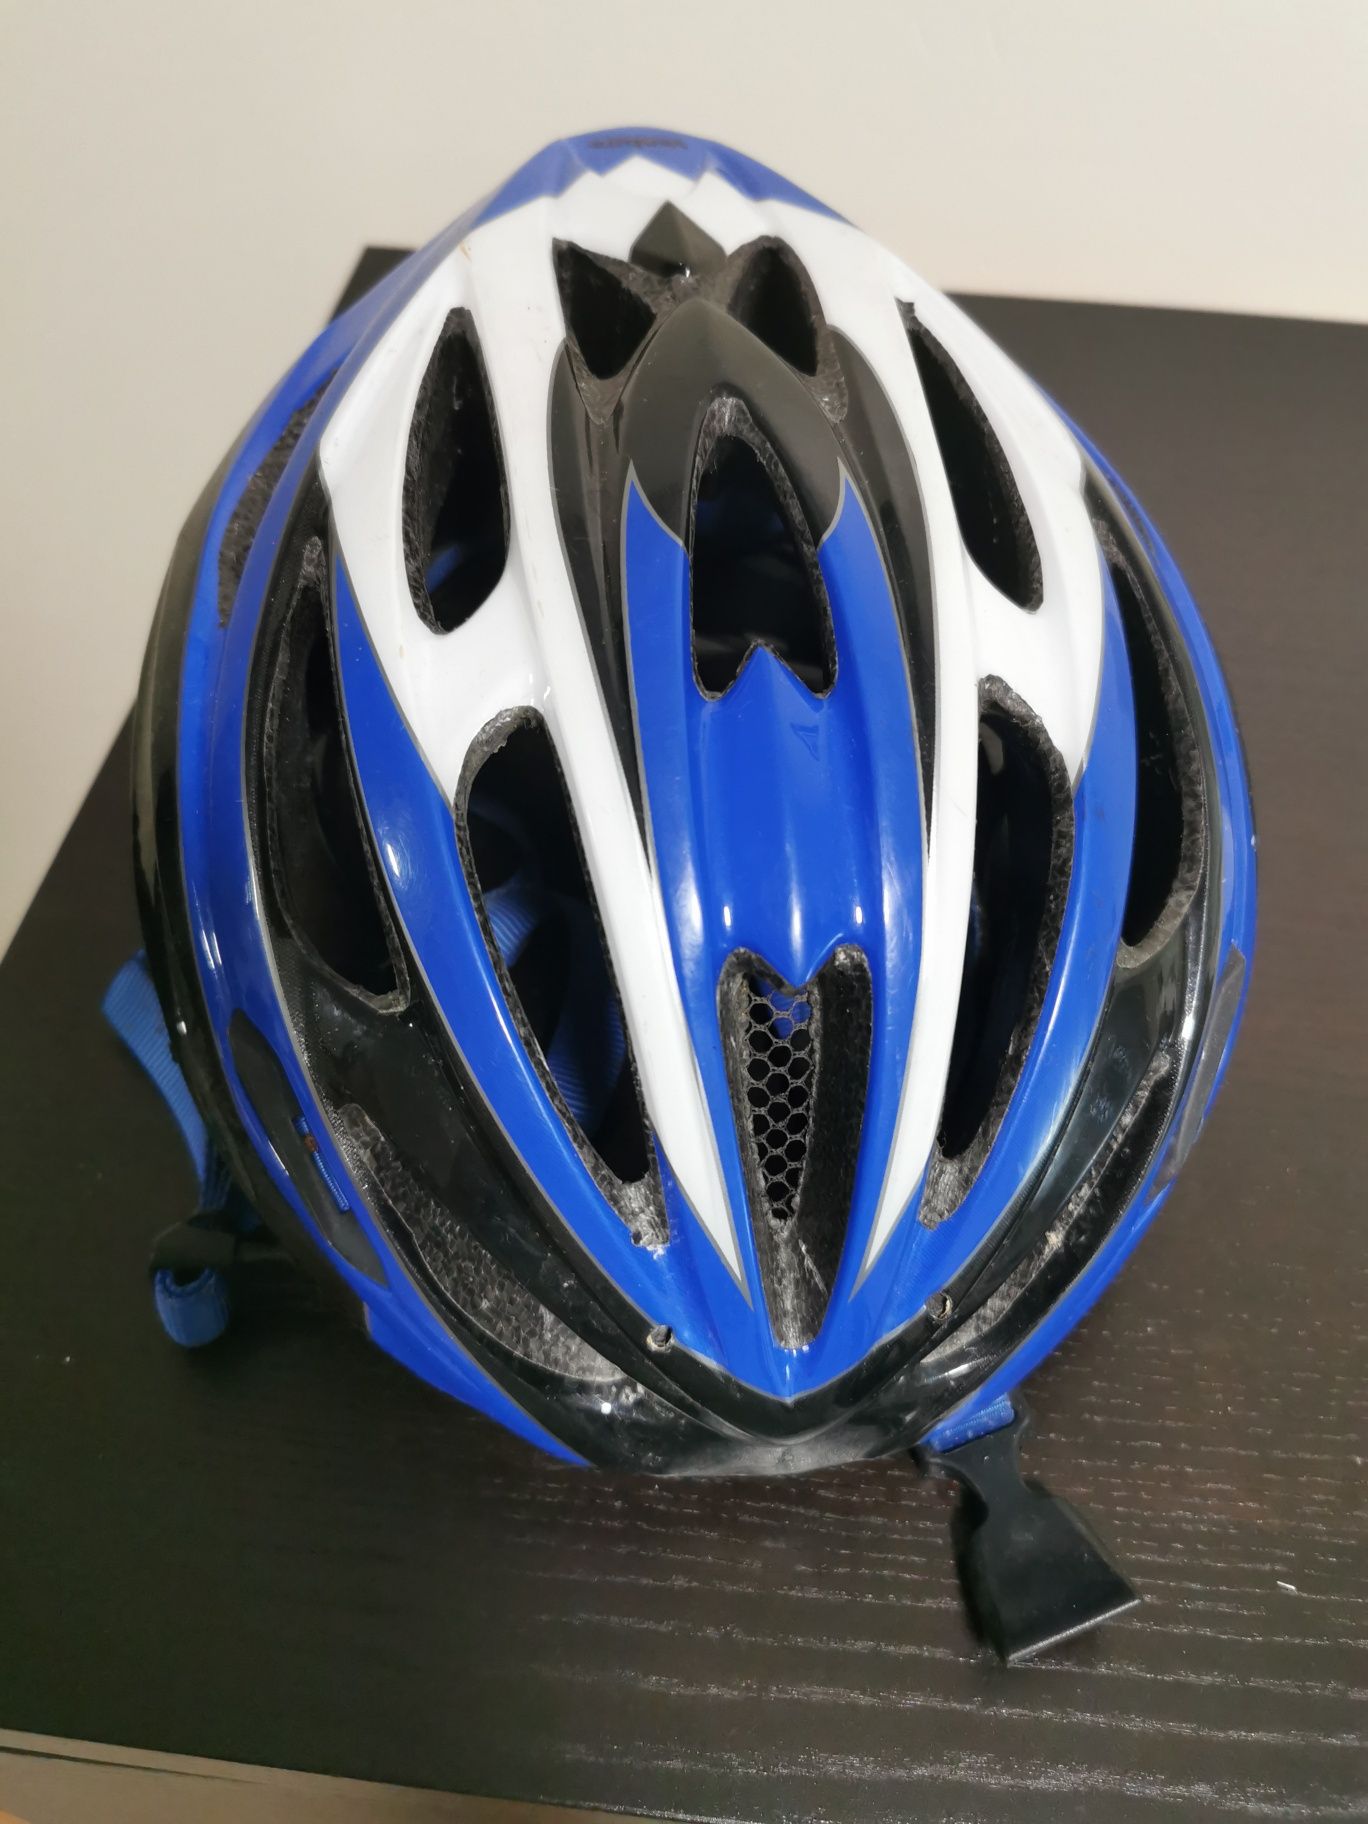 Capacete ciclismo btt bell